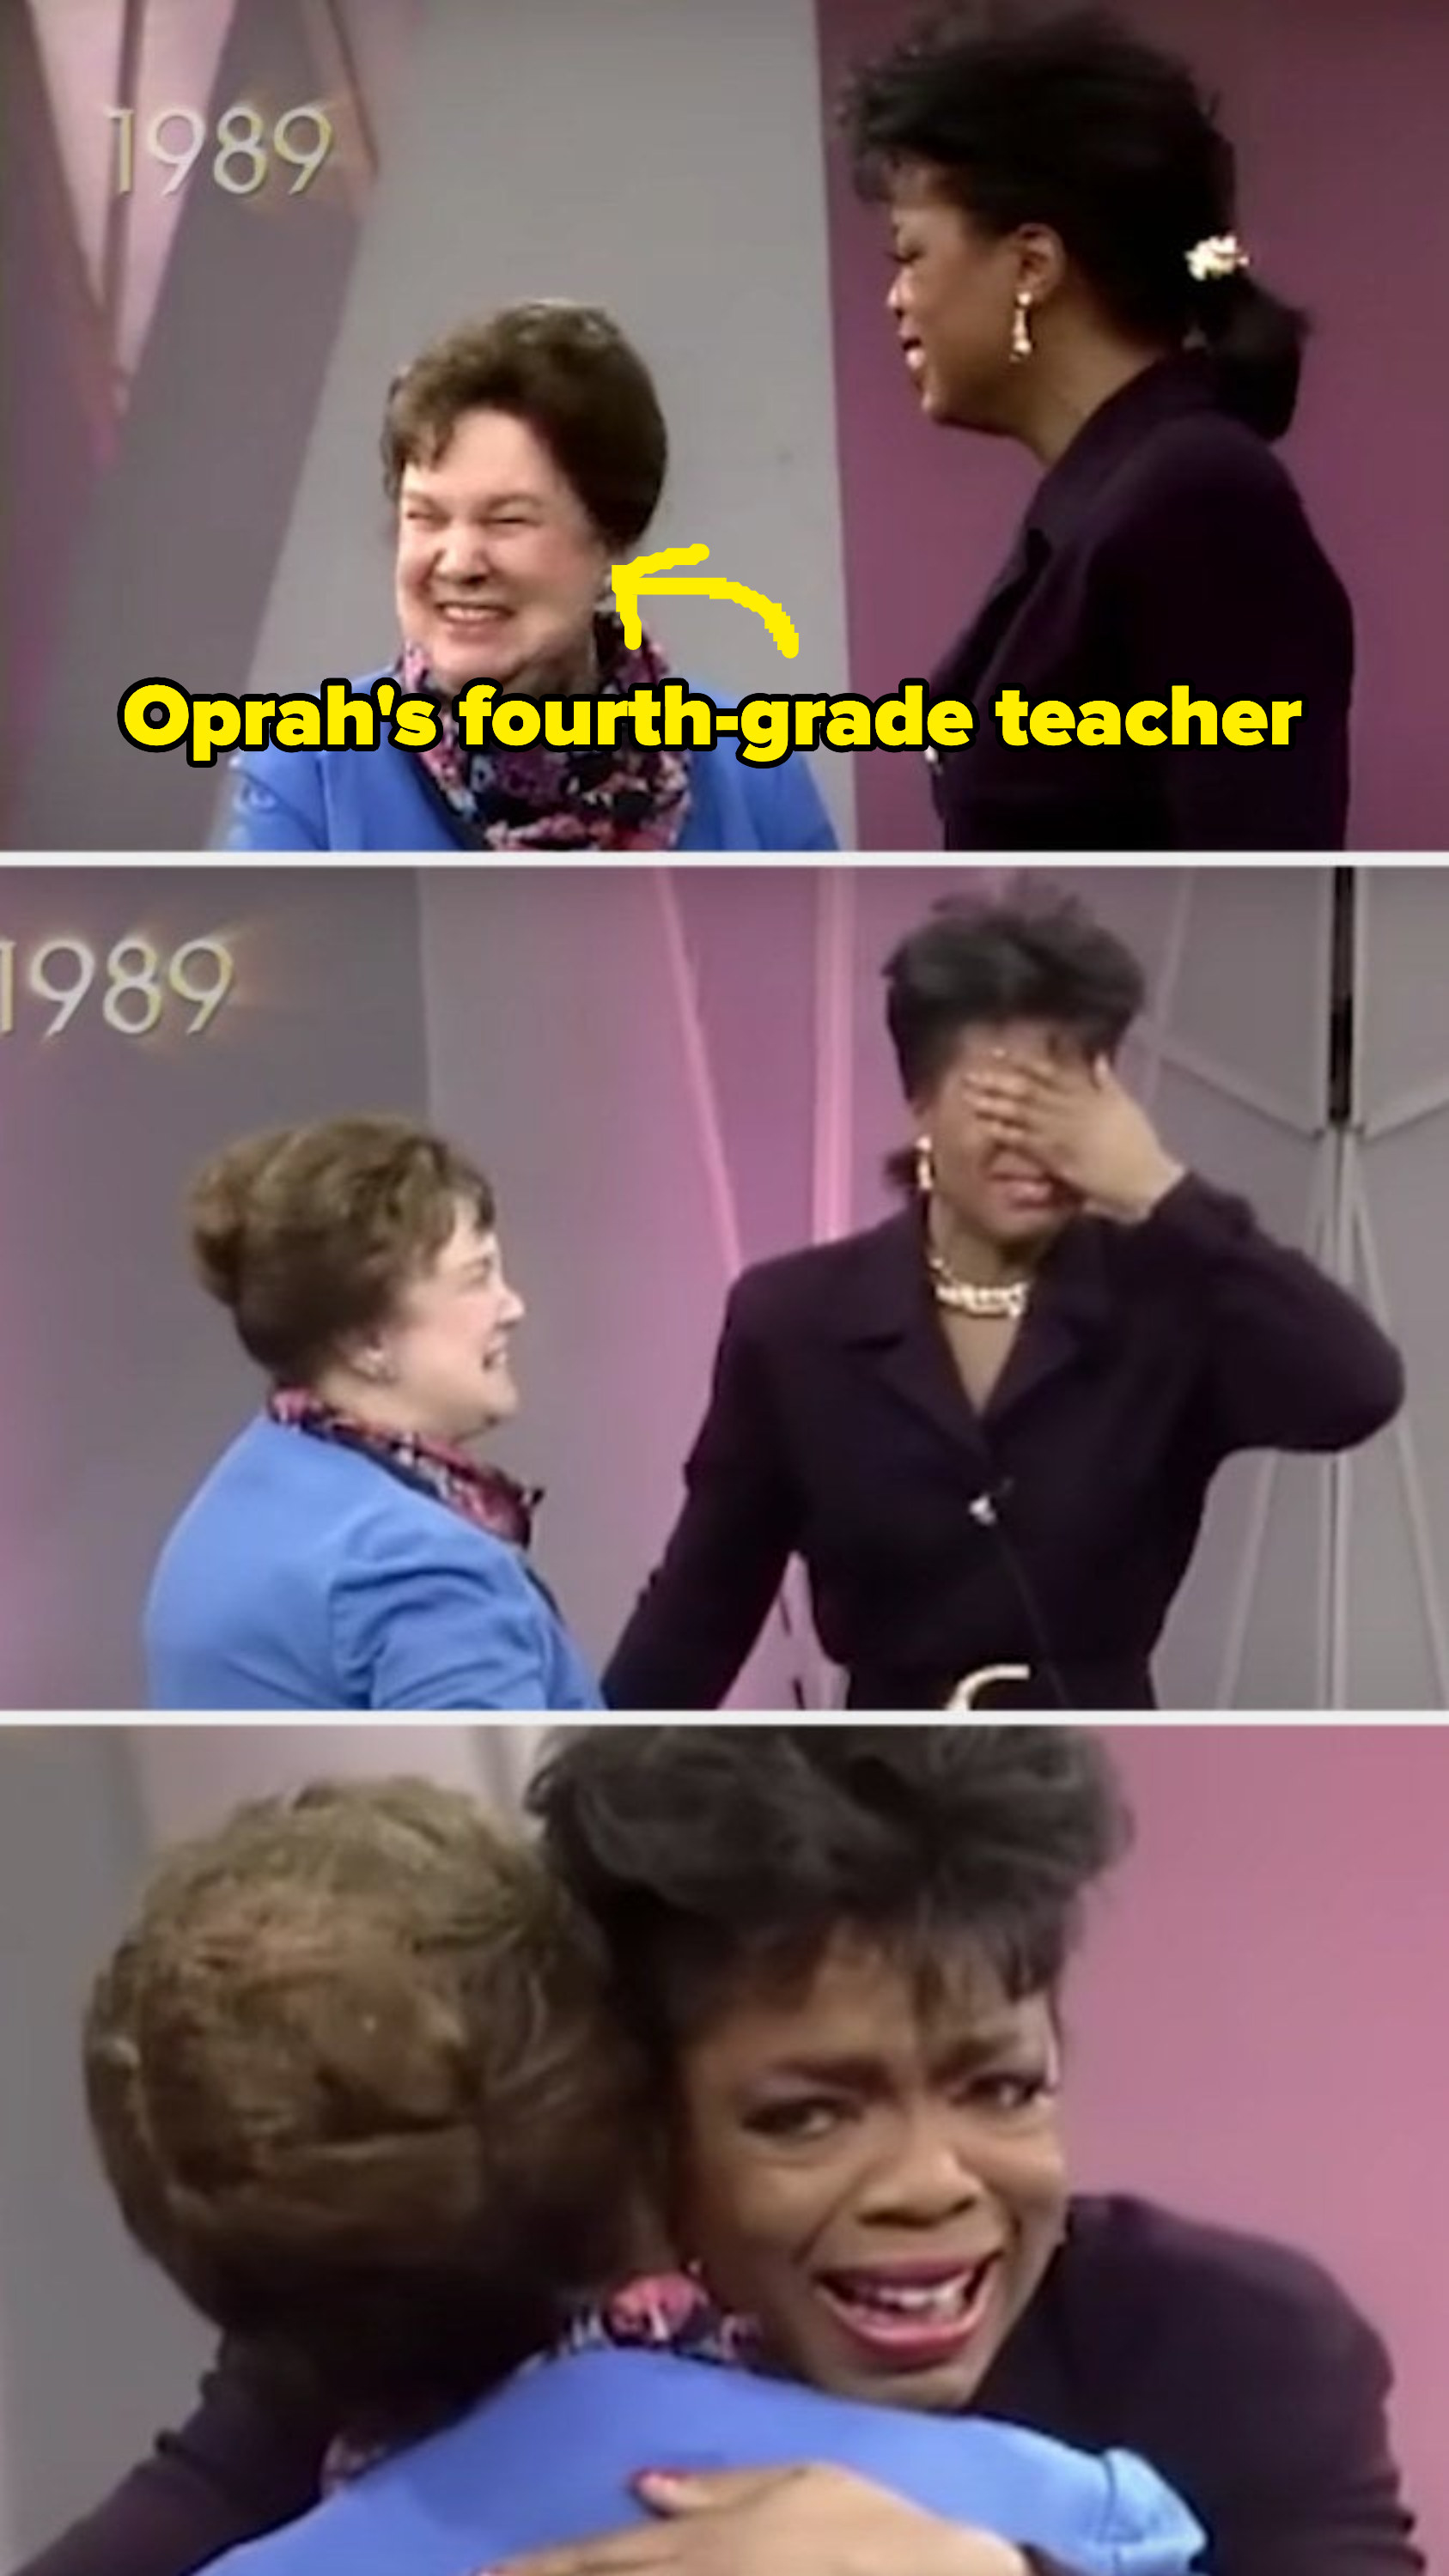 Oprah cries as she reunites with her favorite teacher, Mrs. Duncan, in 1989